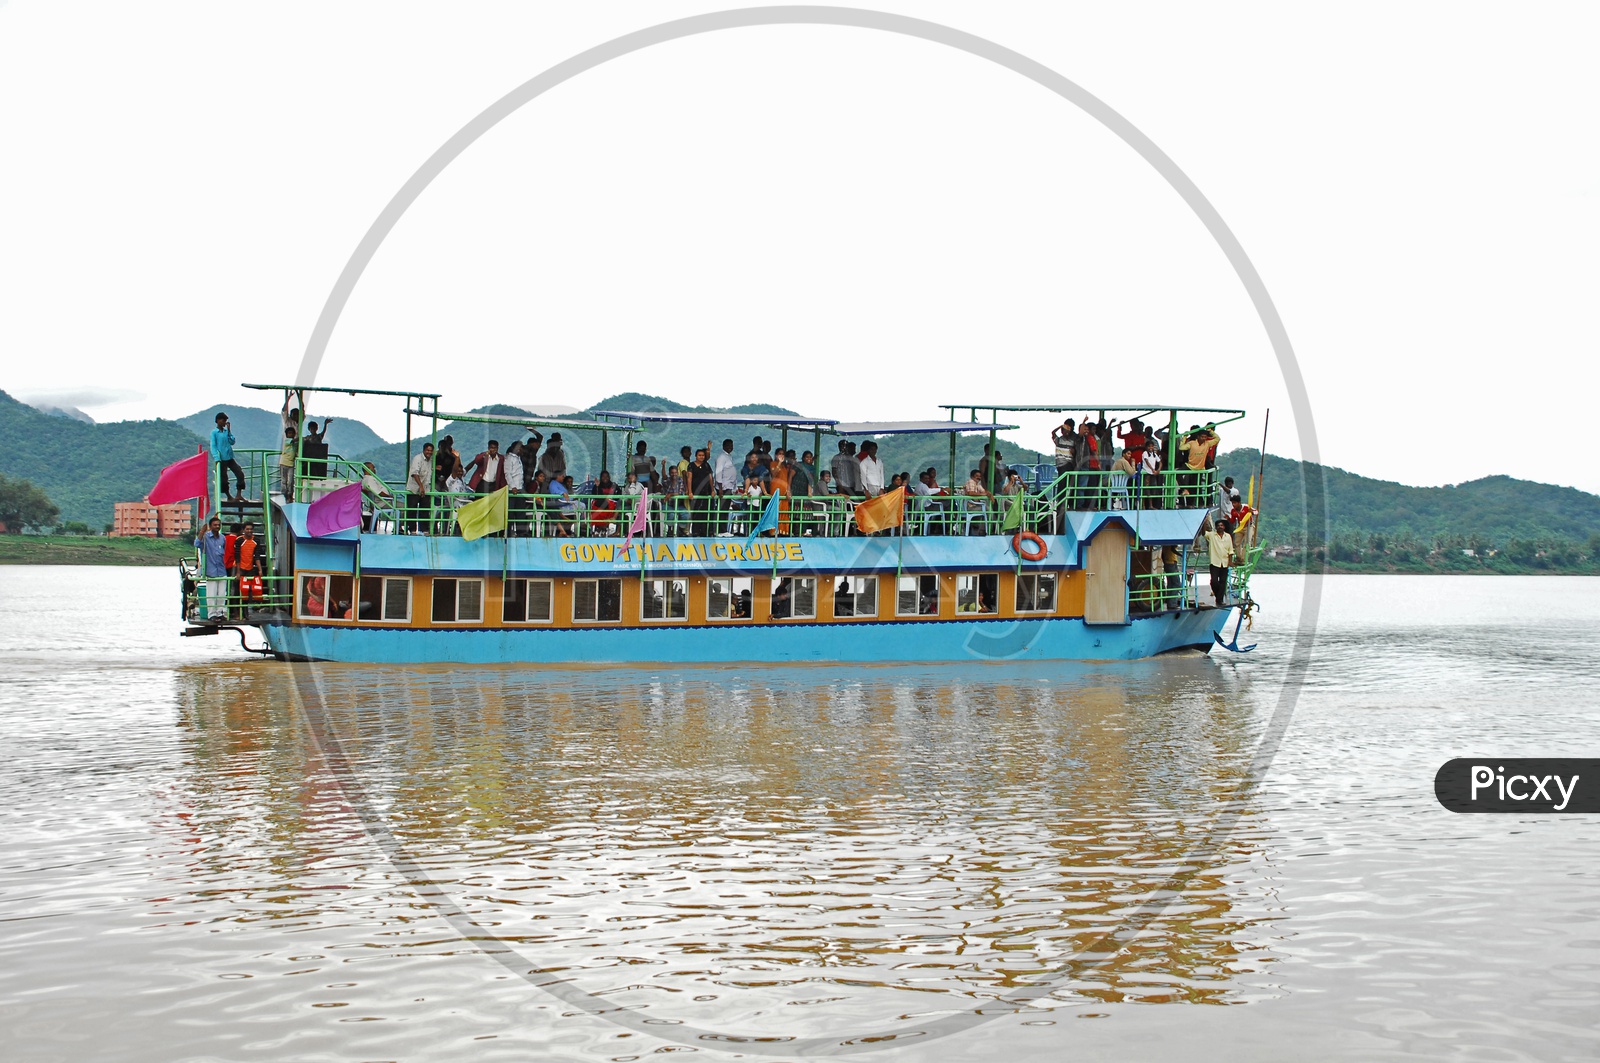 Tourists in the cruise ship moving on the River Godavari